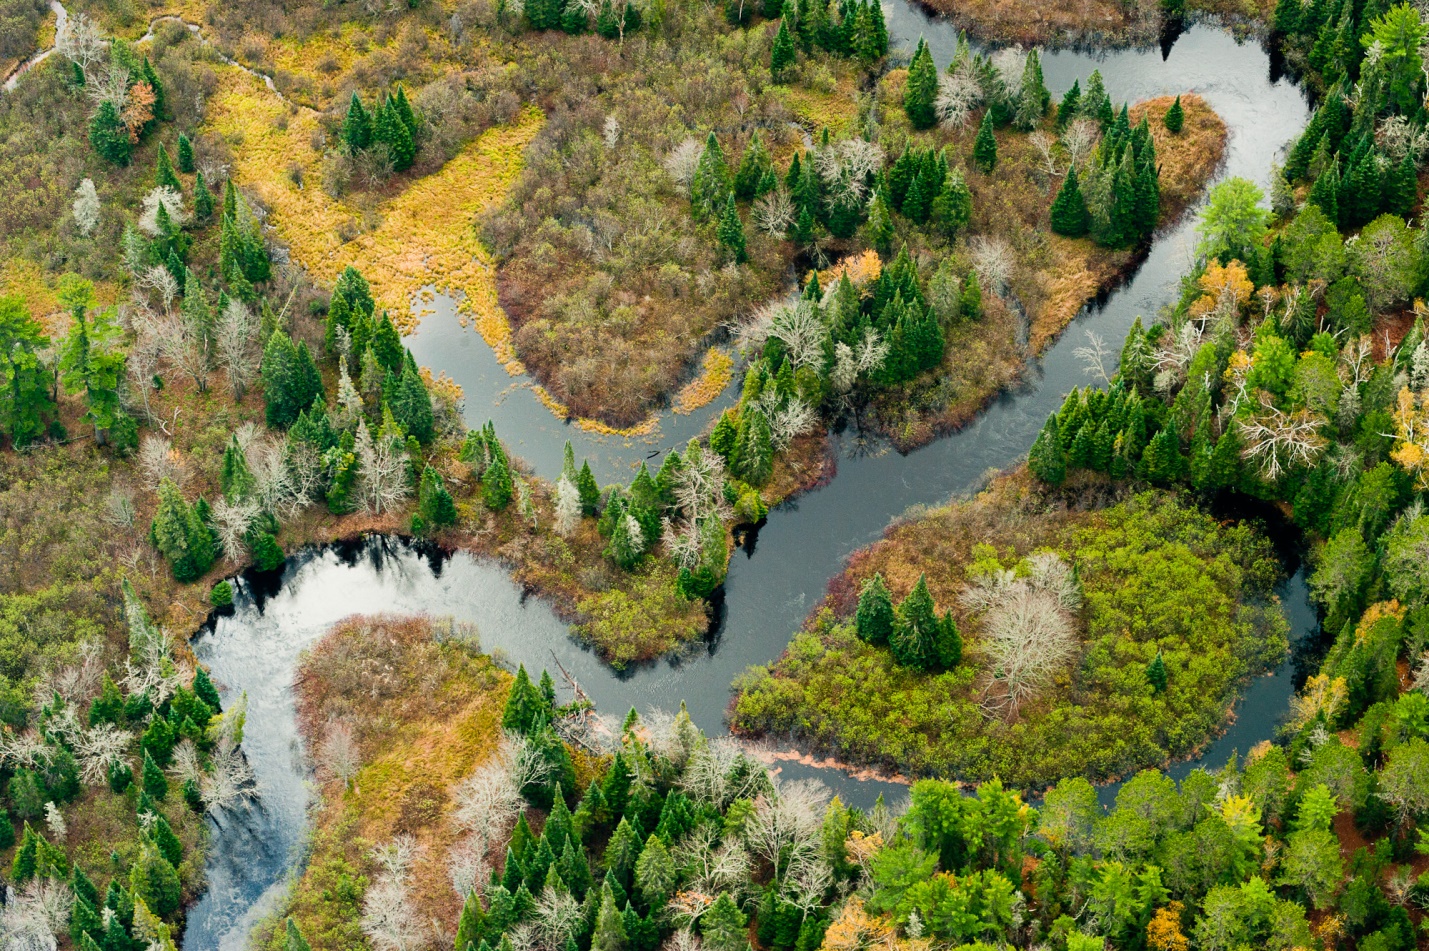 The Two Hearted River, which winds through Michigan. Credit: TNC Archives.